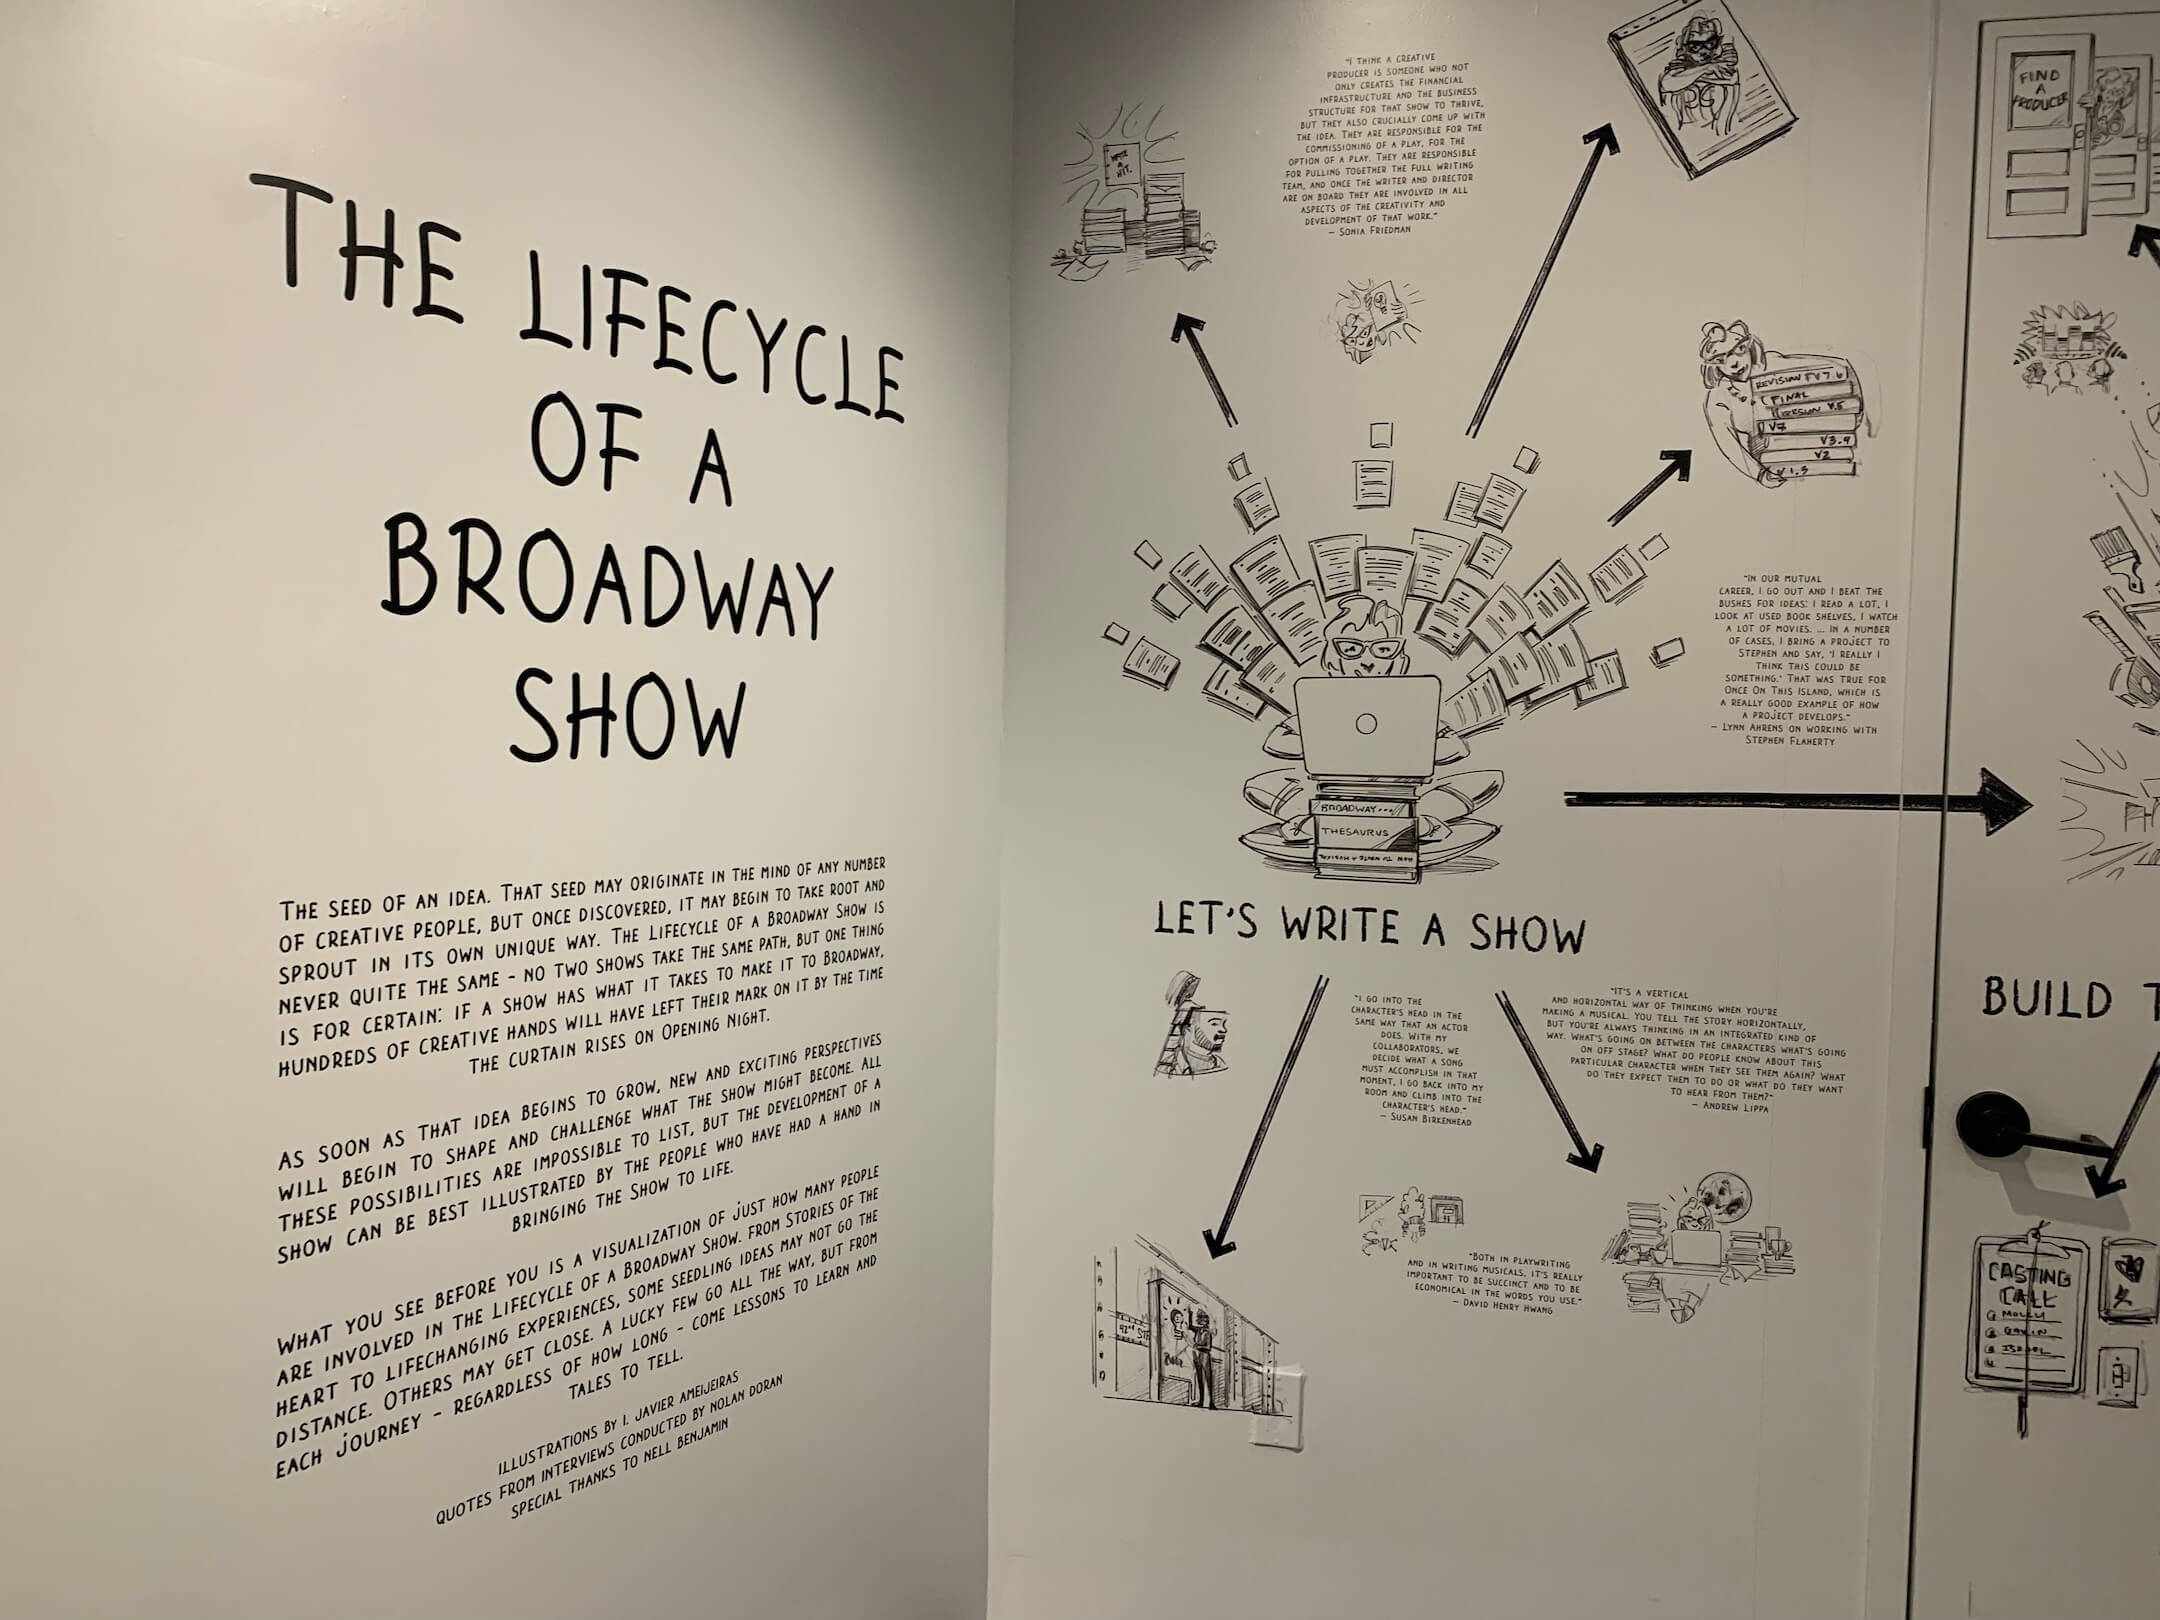  A graphic of the life cycle of a Broadway show covers the walls (Part 1) 